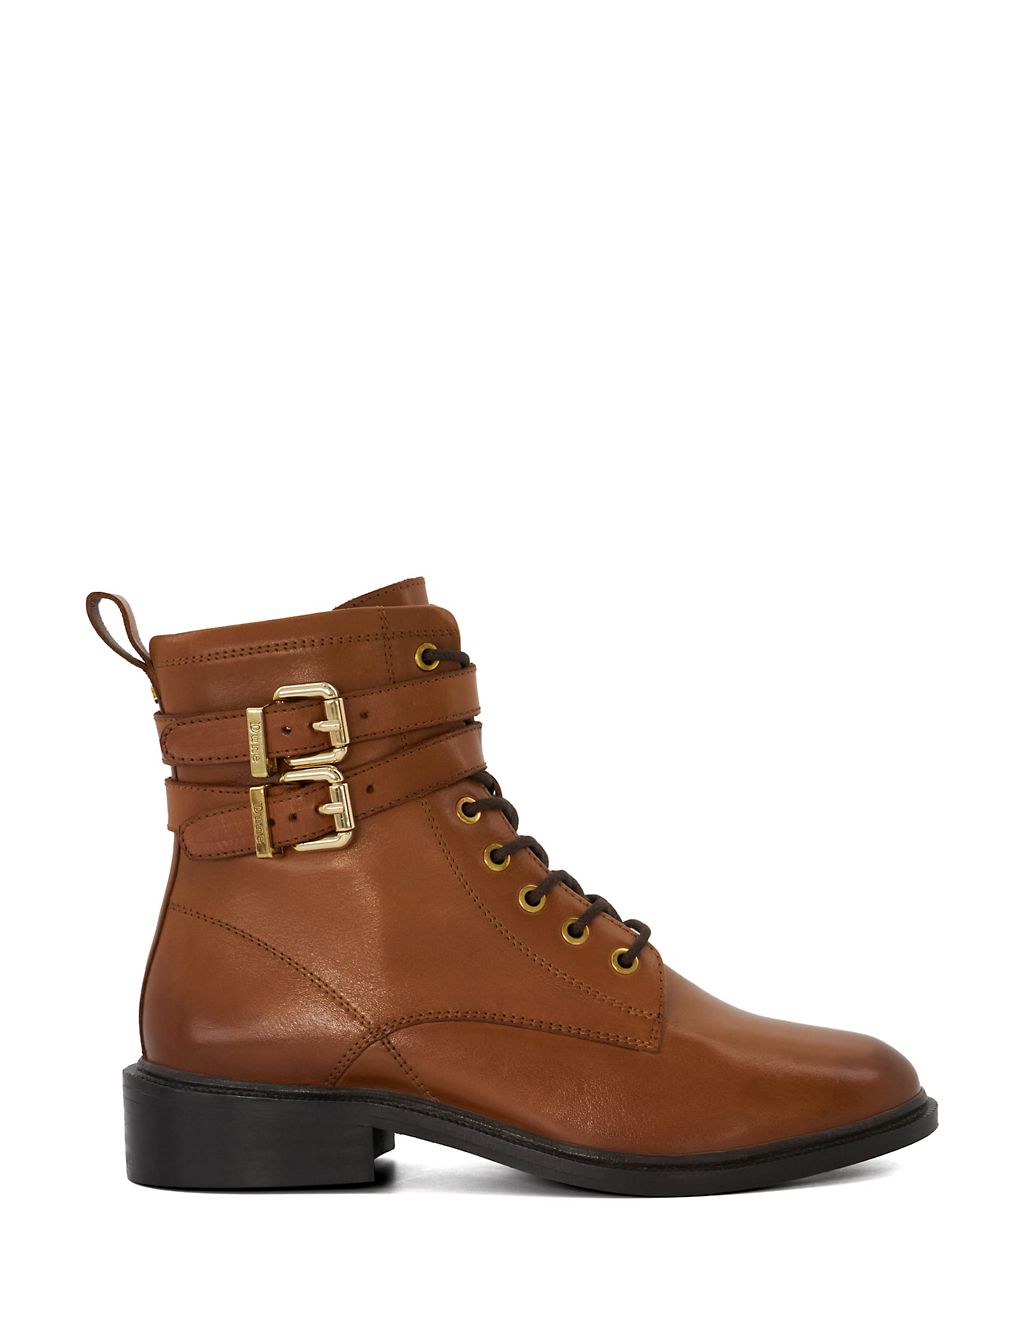 Leather Lace Up Buckle Flat Ankle Boots 3 of 4